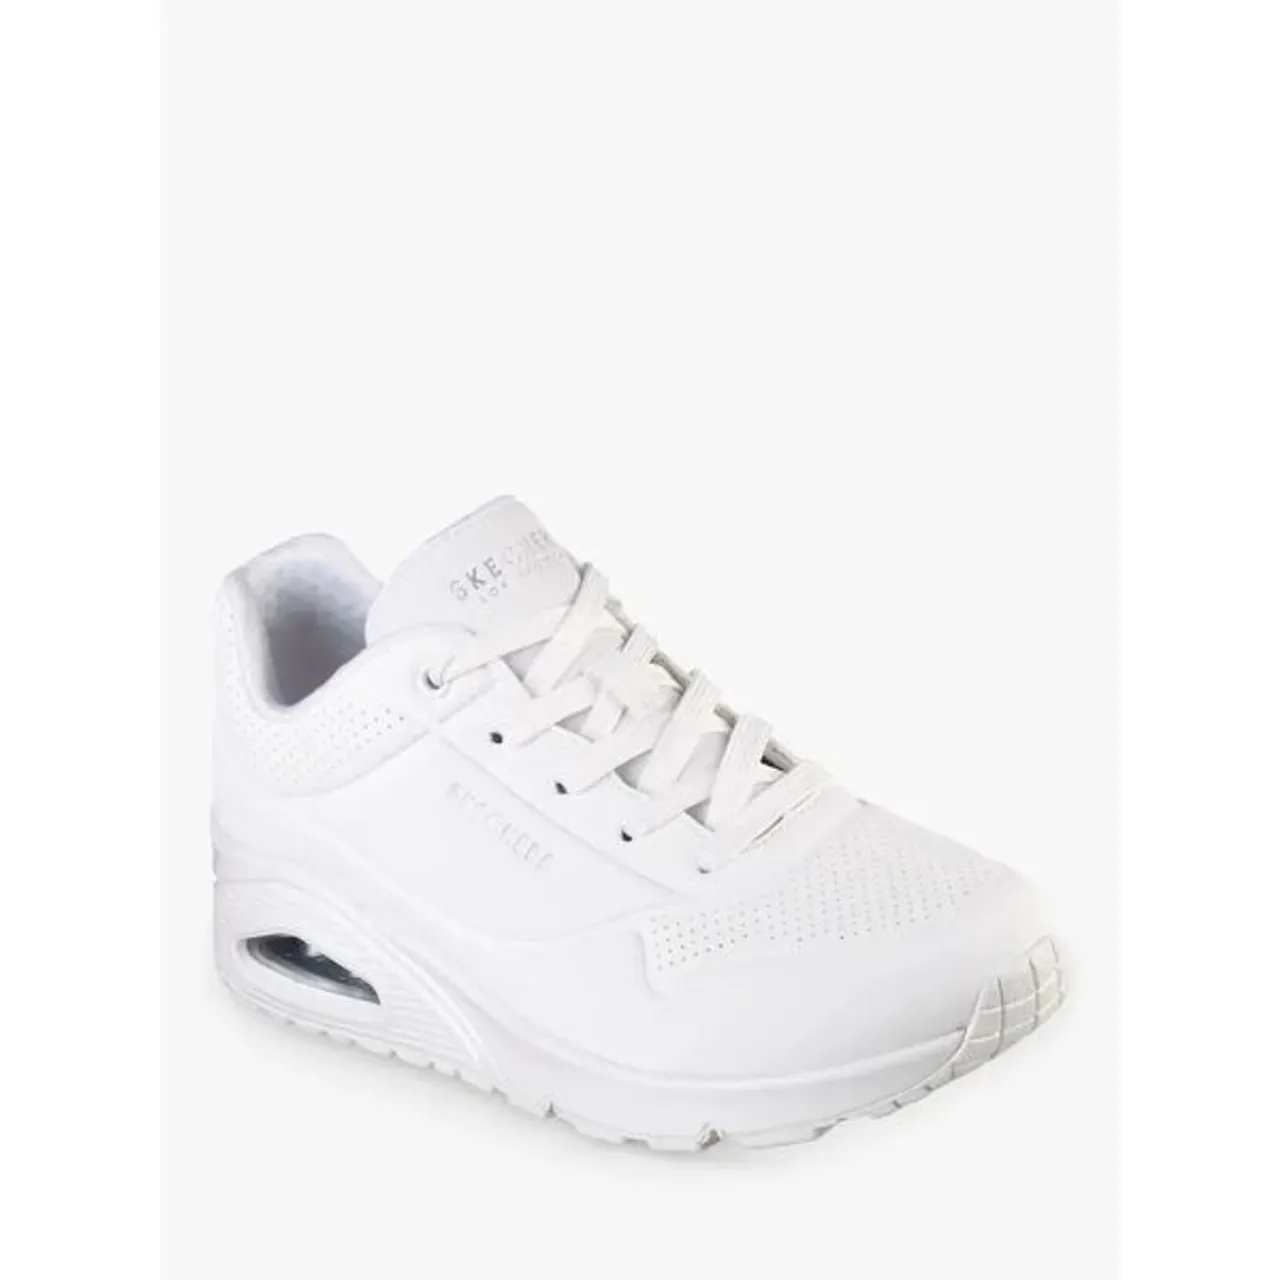 Skechers Uno Stand On Air Sports Trainers, White - White - Female